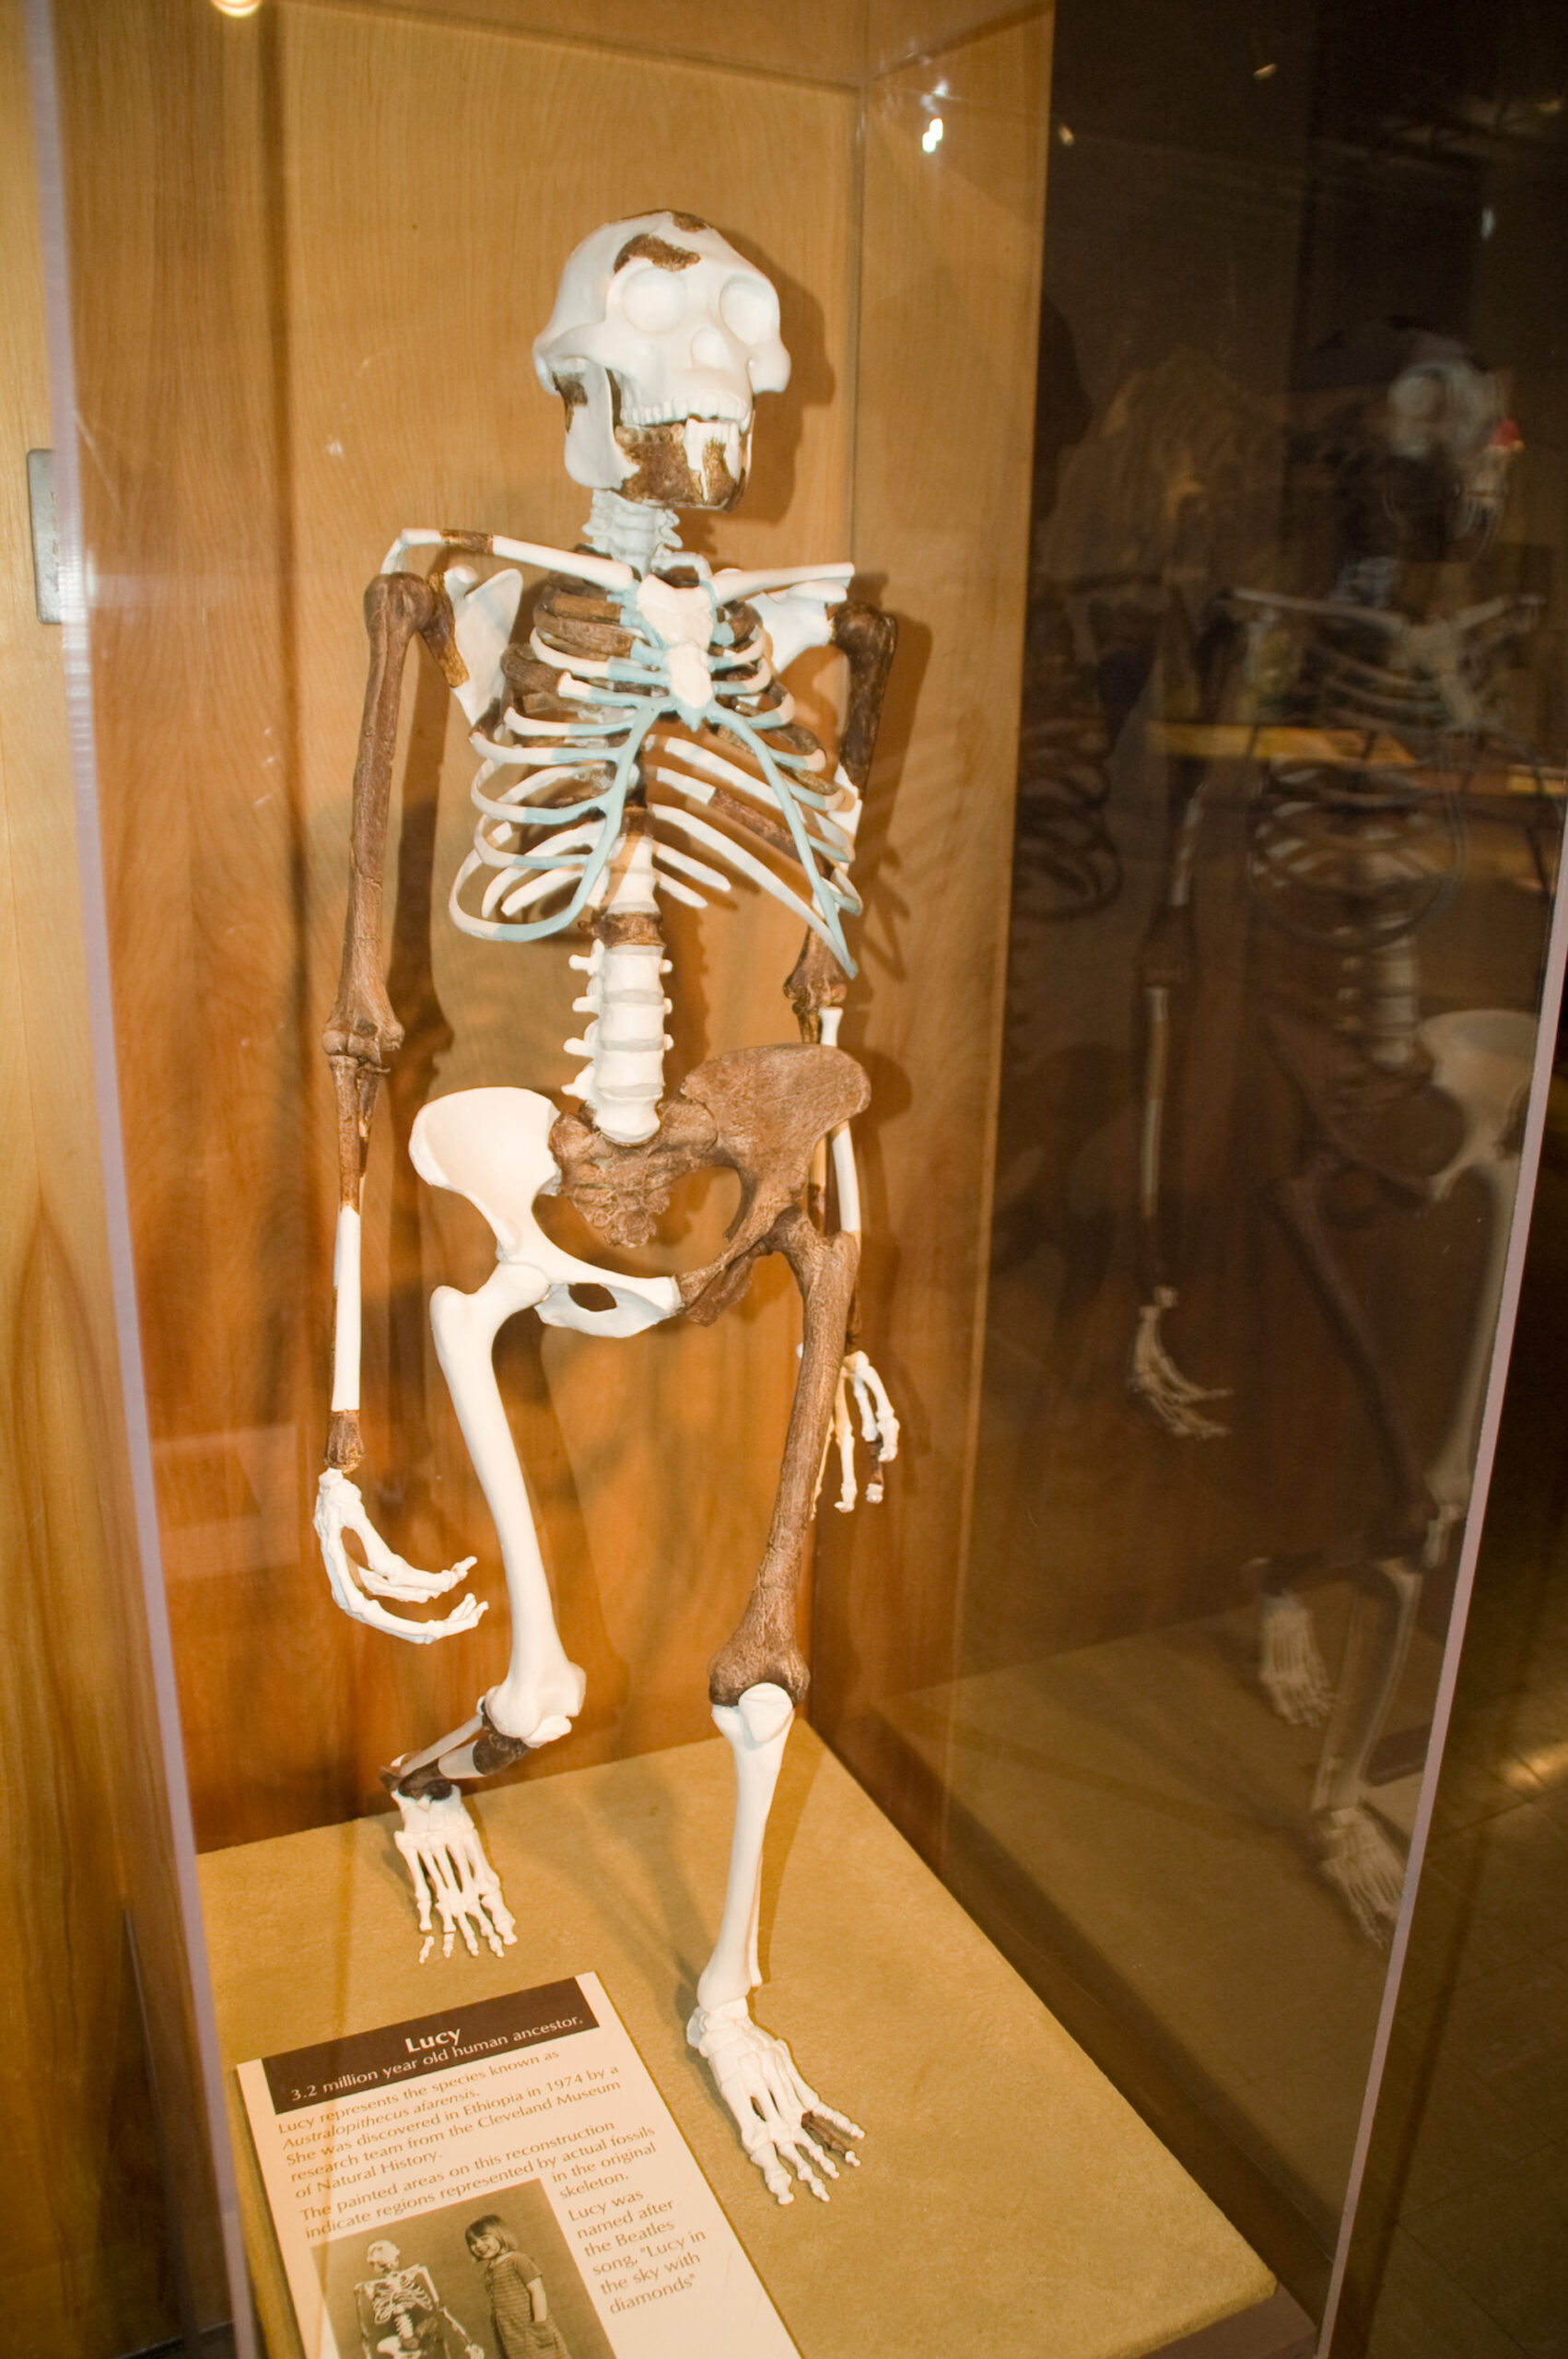 Replica skeleton of Lucy in the Cleveland Natural History Museum